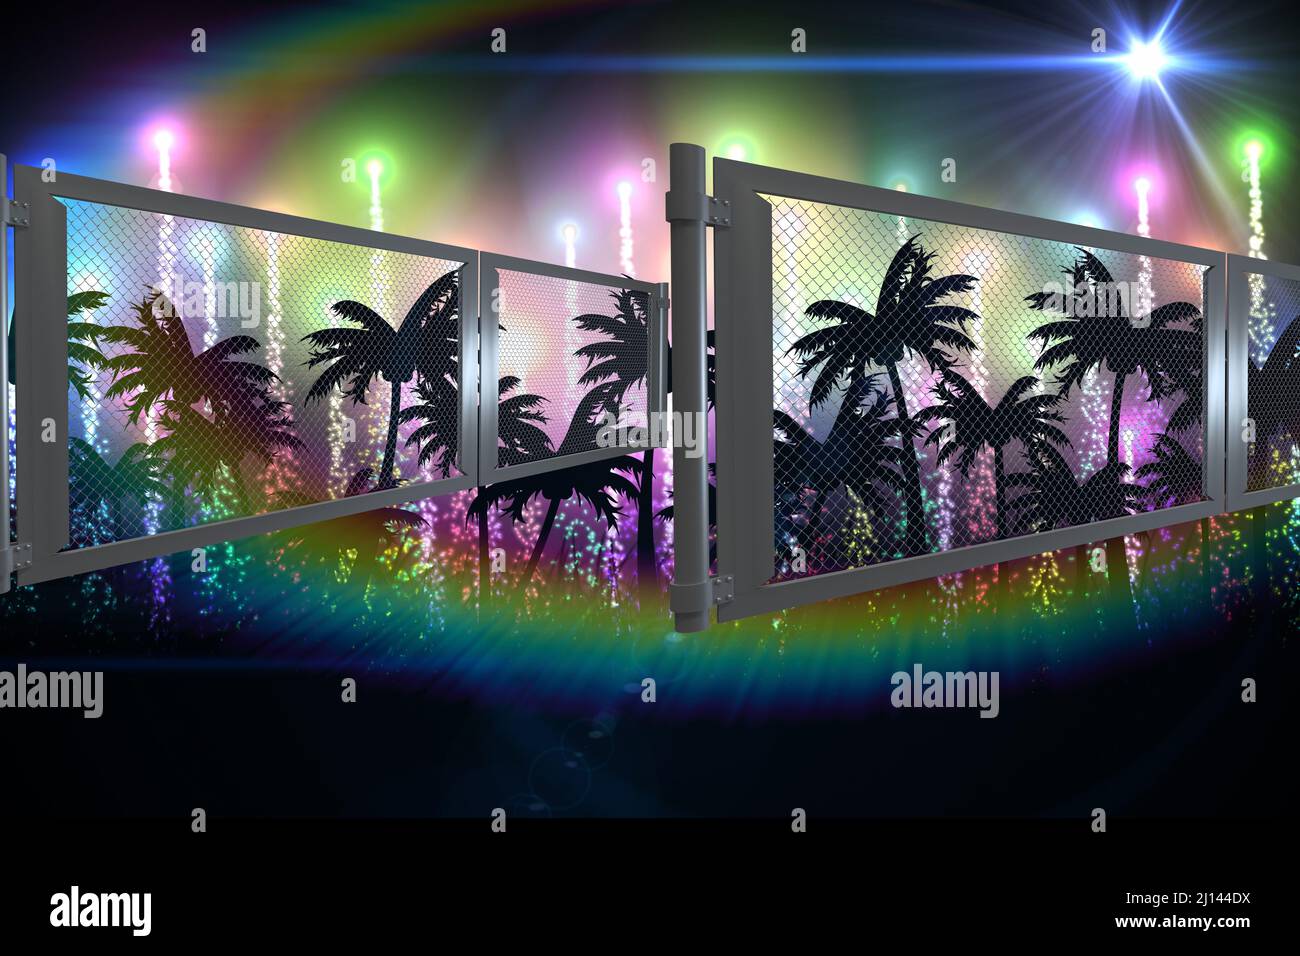 Rainbow lens flare and fence over silhouette of palm trees against light trails Stock Photo